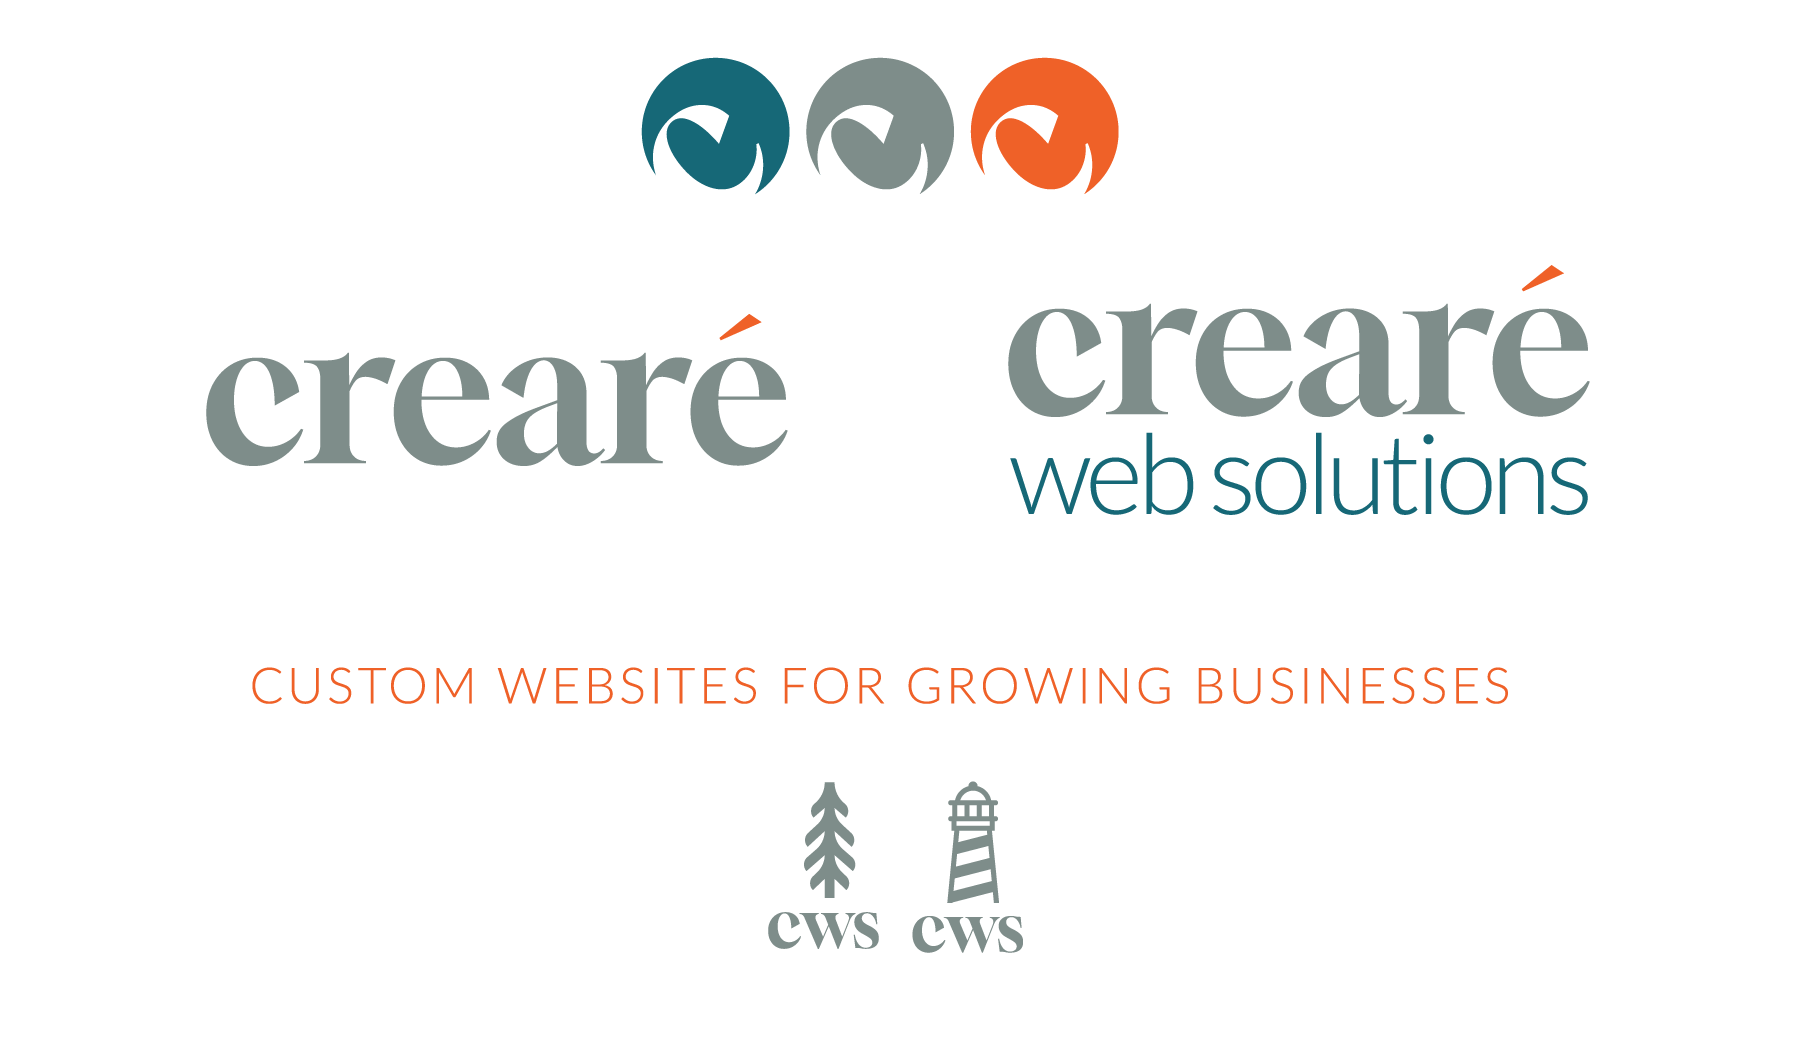 The Creare Web Solutions 2023 Logo and Branding Package